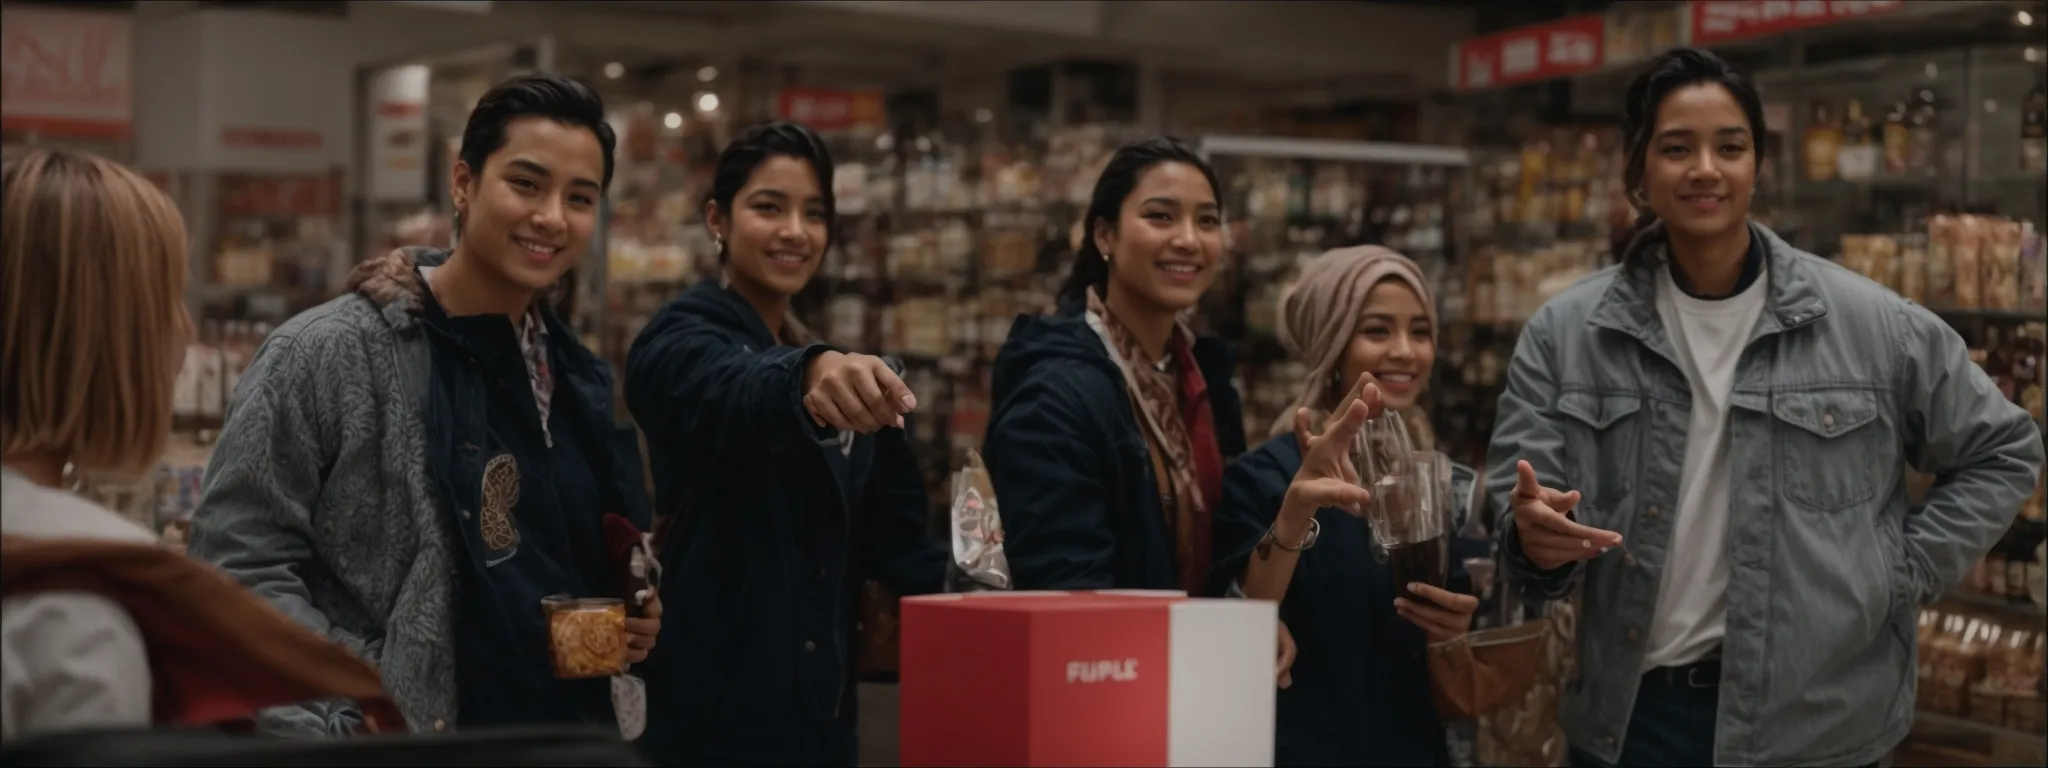 a group of diverse individuals joyfully pointing towards a product display, signifying collective approval.